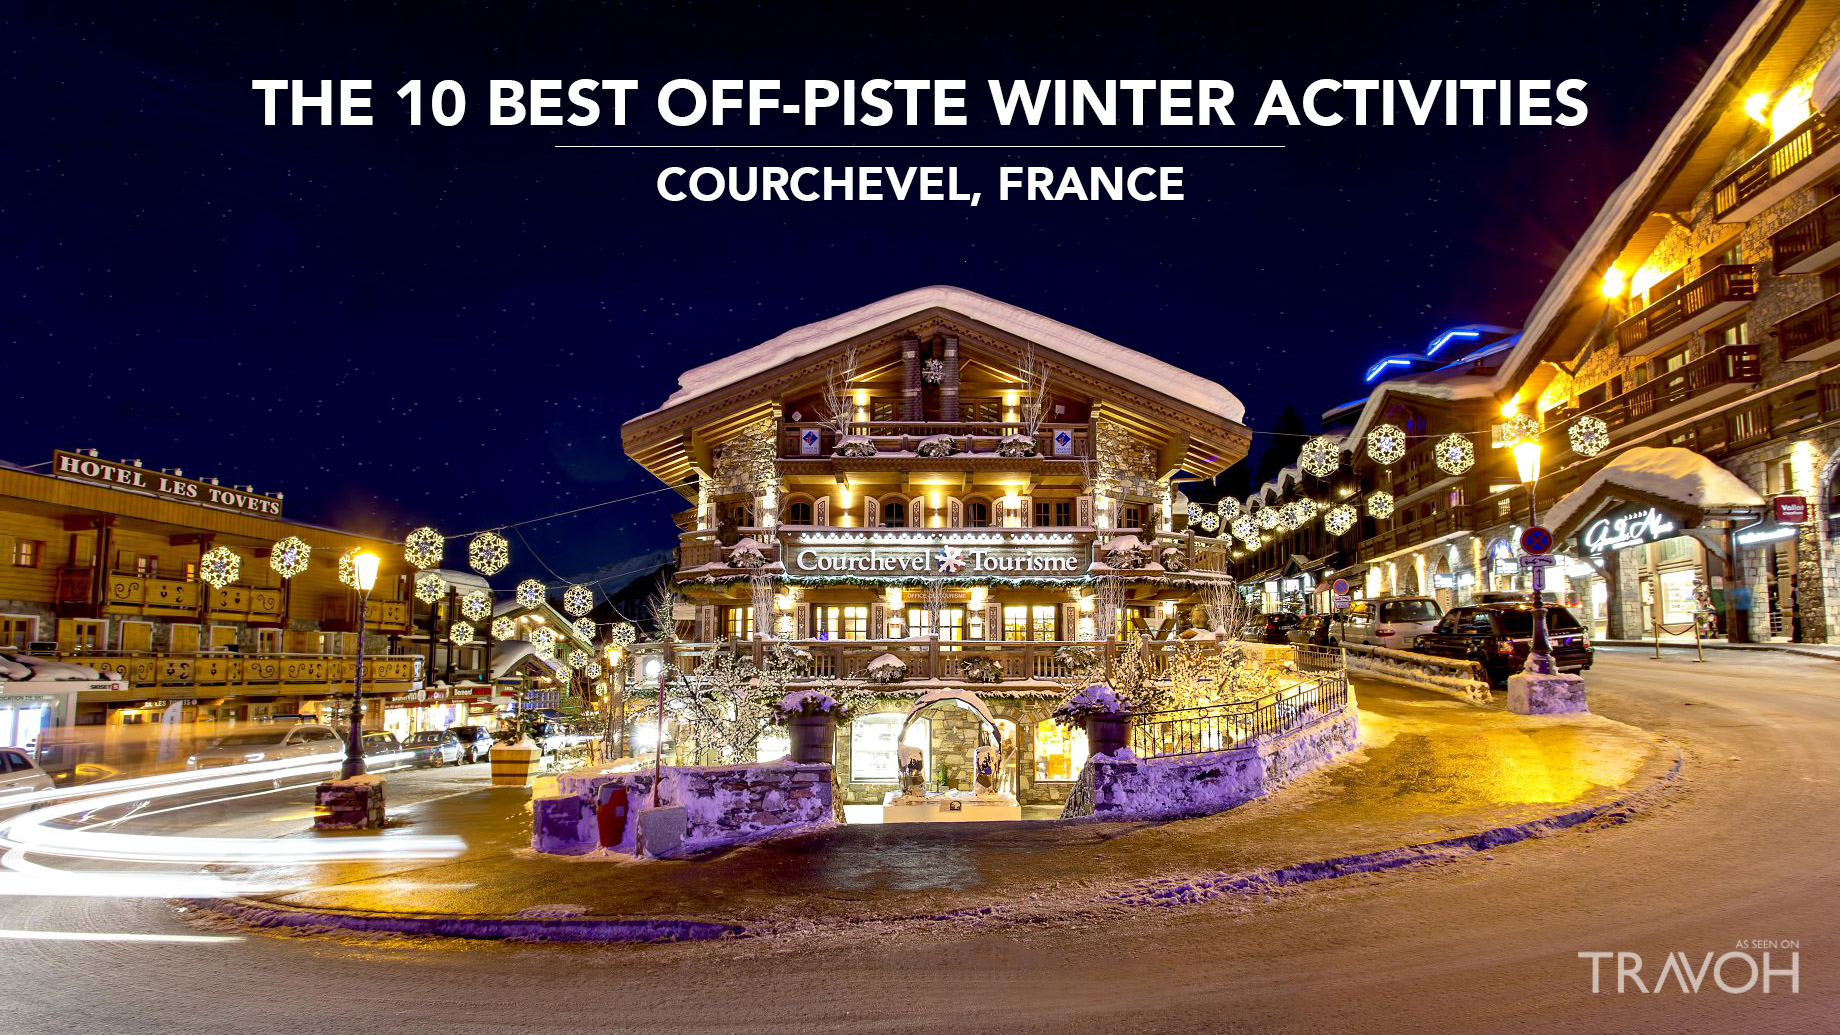 The 10 Best Off-Piste Winter Activities in Courchevel, France